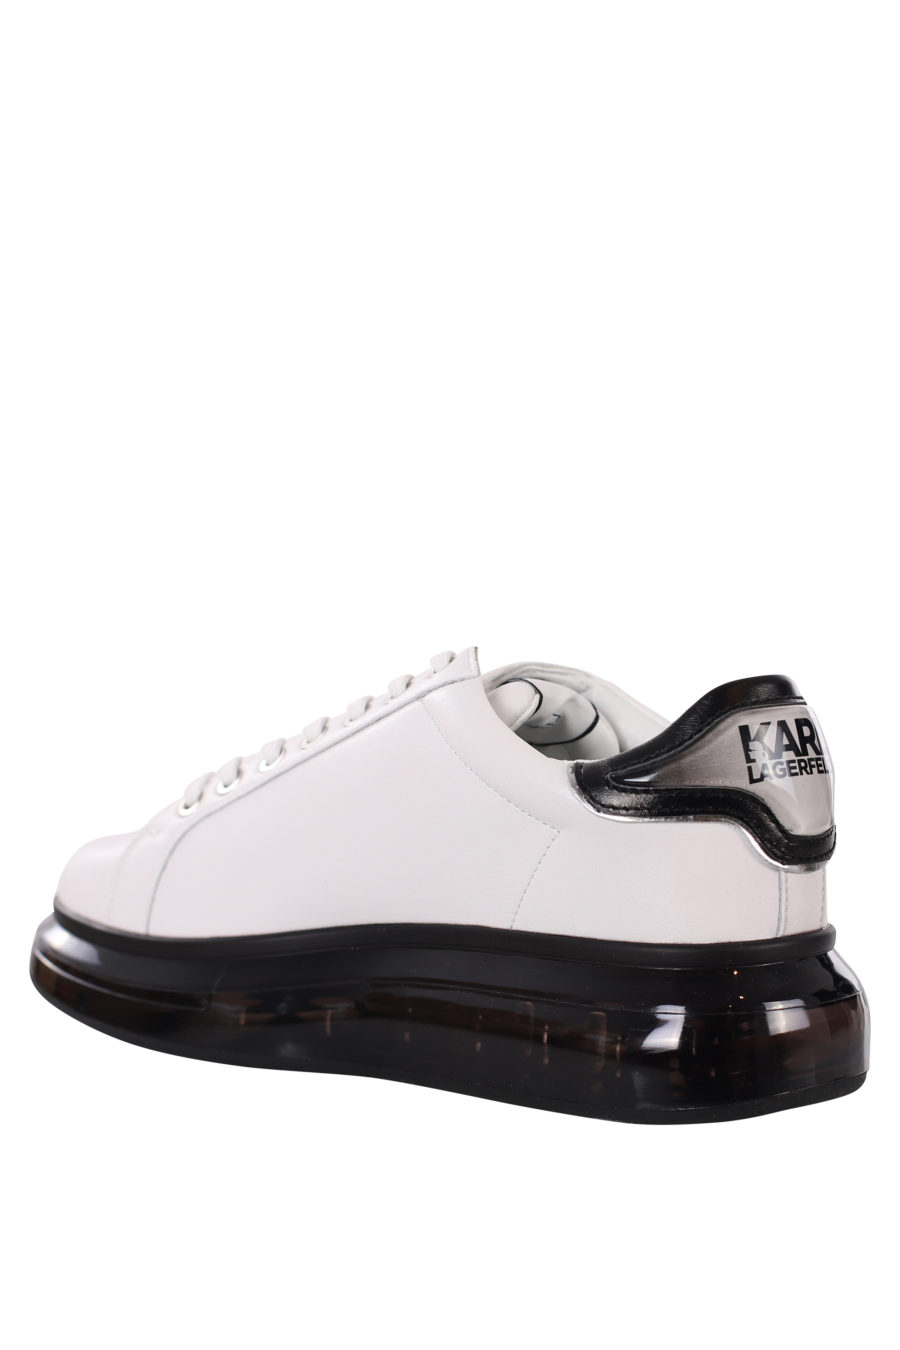 White trainers with black silhouette logo and black sole - IMG 0421